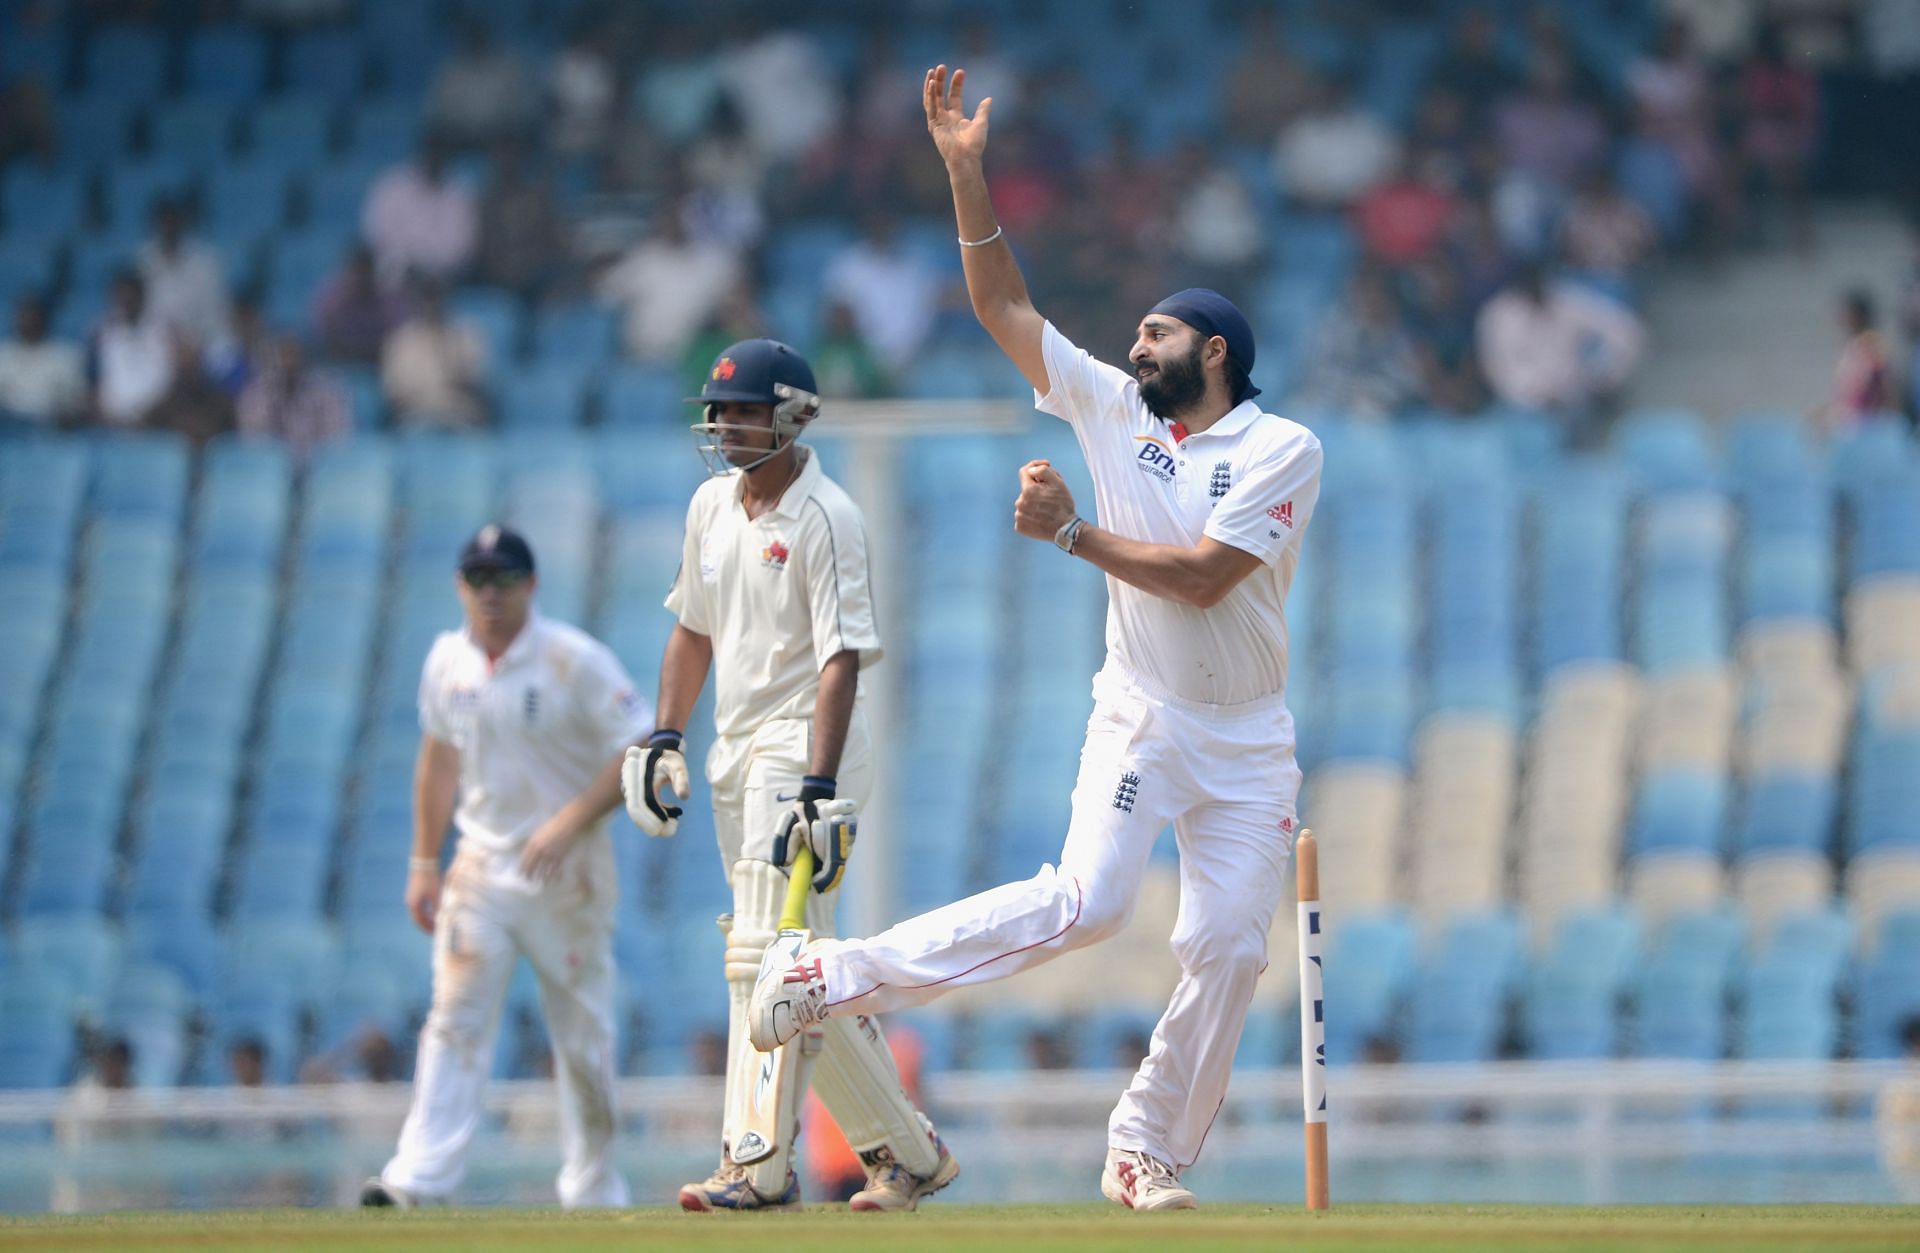 Monty Panesar bowling during the 2012 tour of India. (Pic: Getty Images)